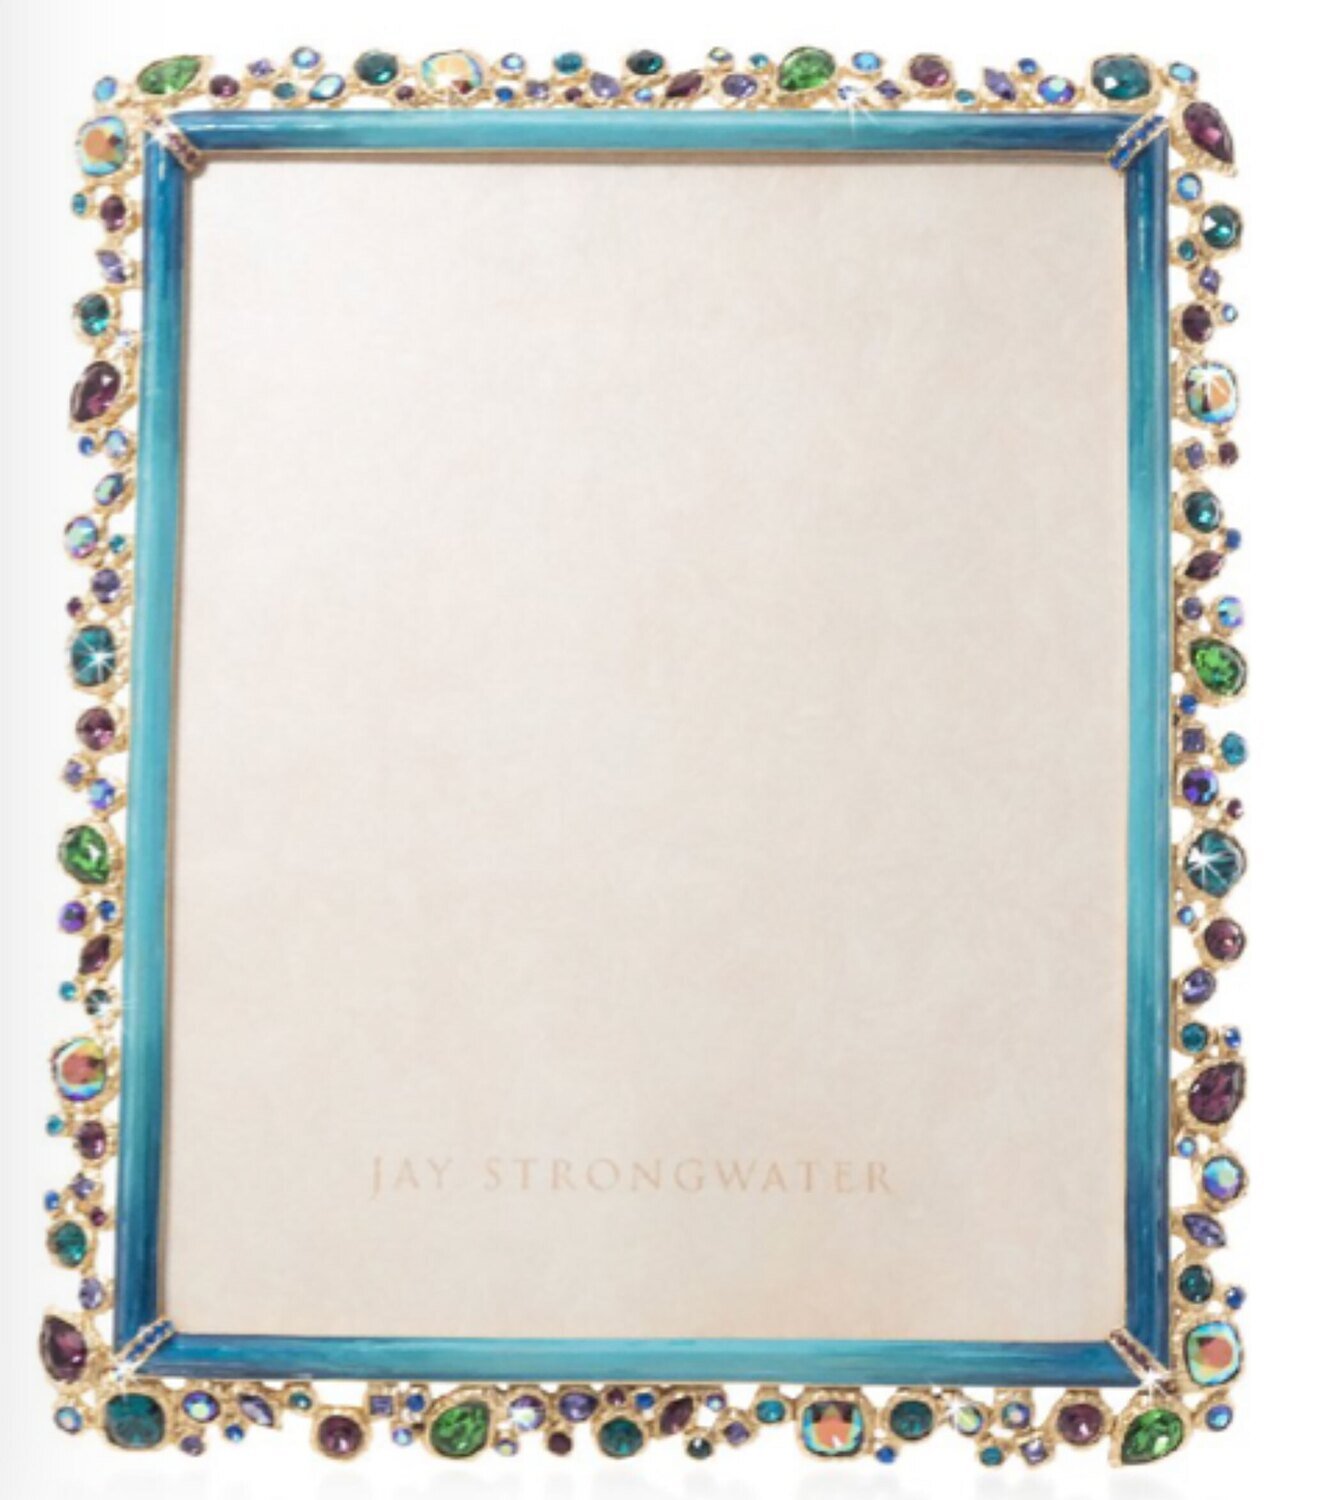 Jay Strongwater Theo Bejeweled 8" x 10" Picture Frame SPF5843-208